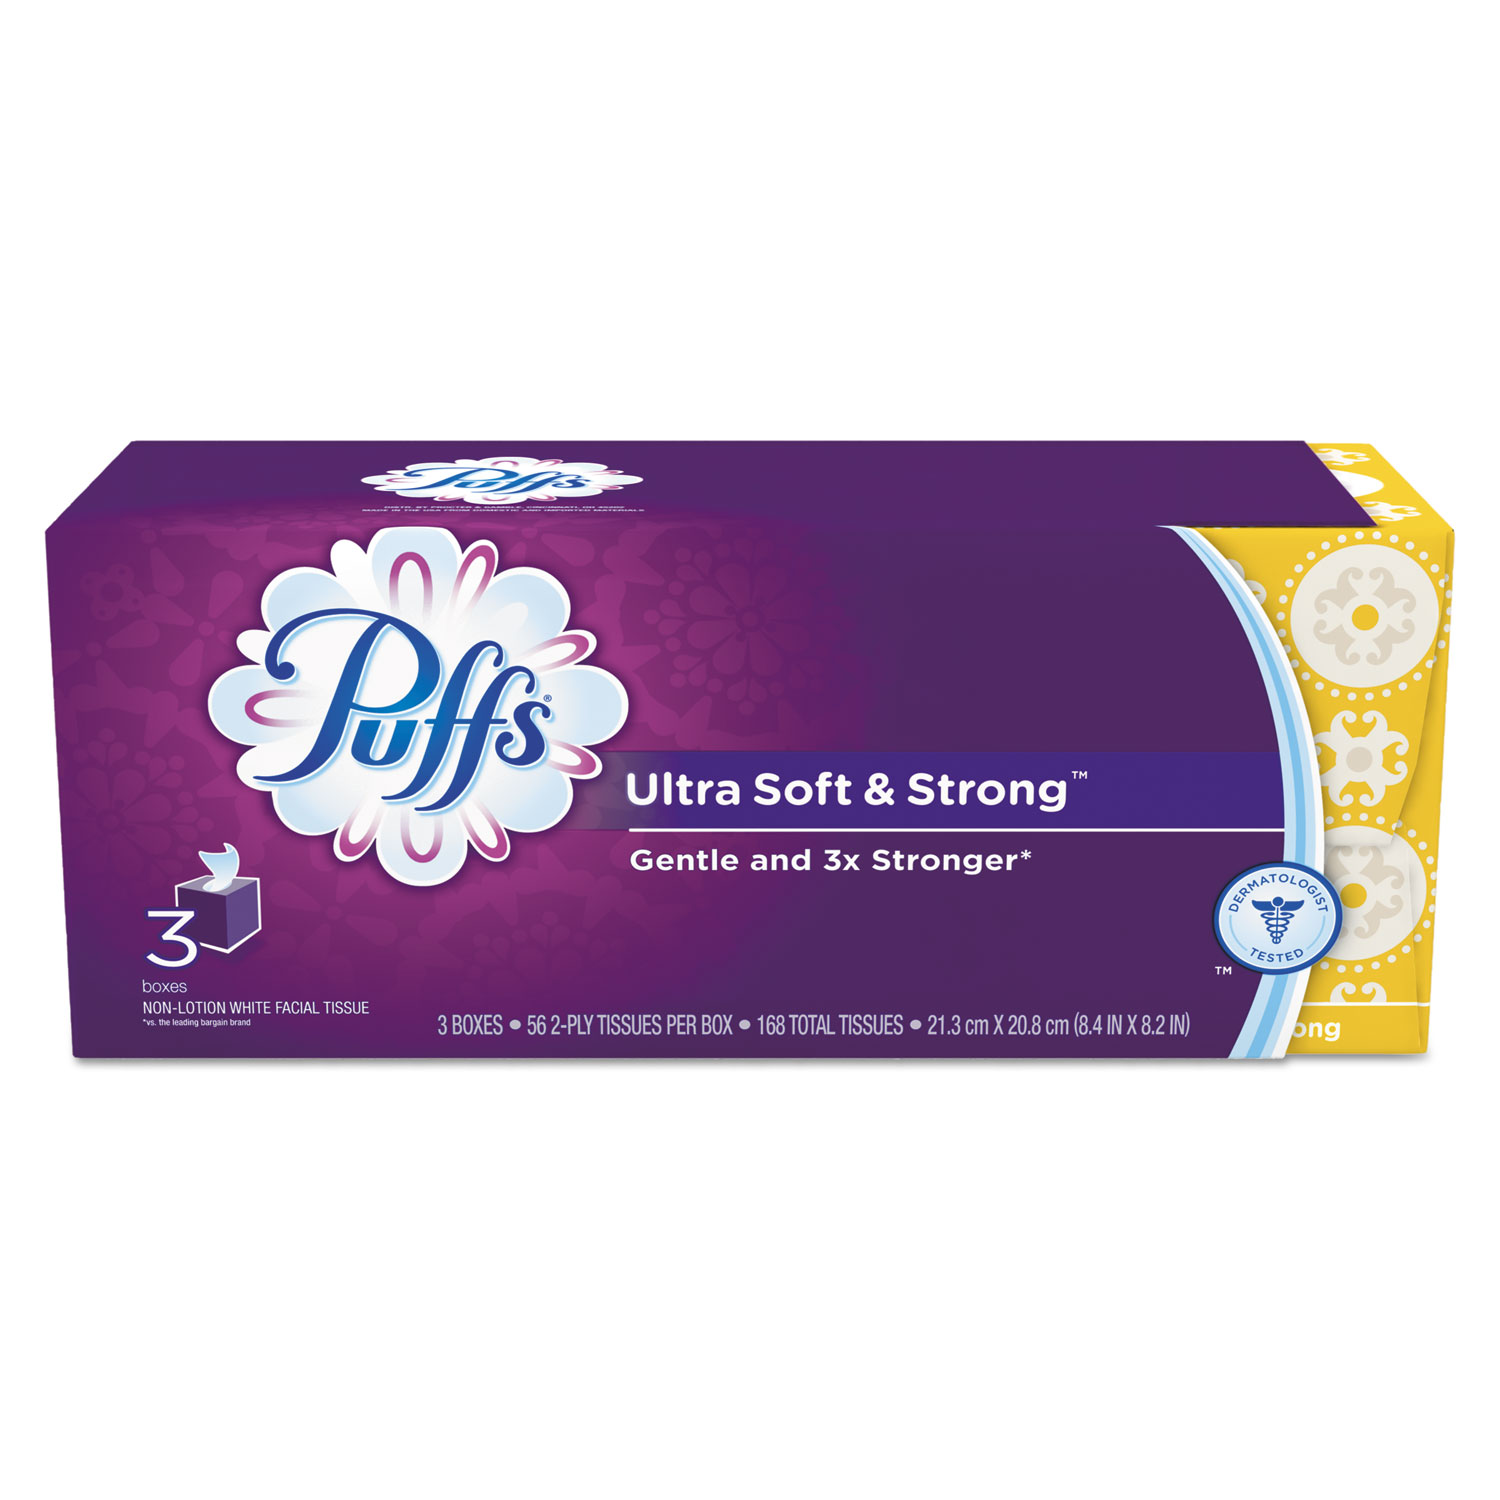 Plus Lotion Facial Tissue, White, 2-Ply, 116/Box, 3 Boxes/Pack